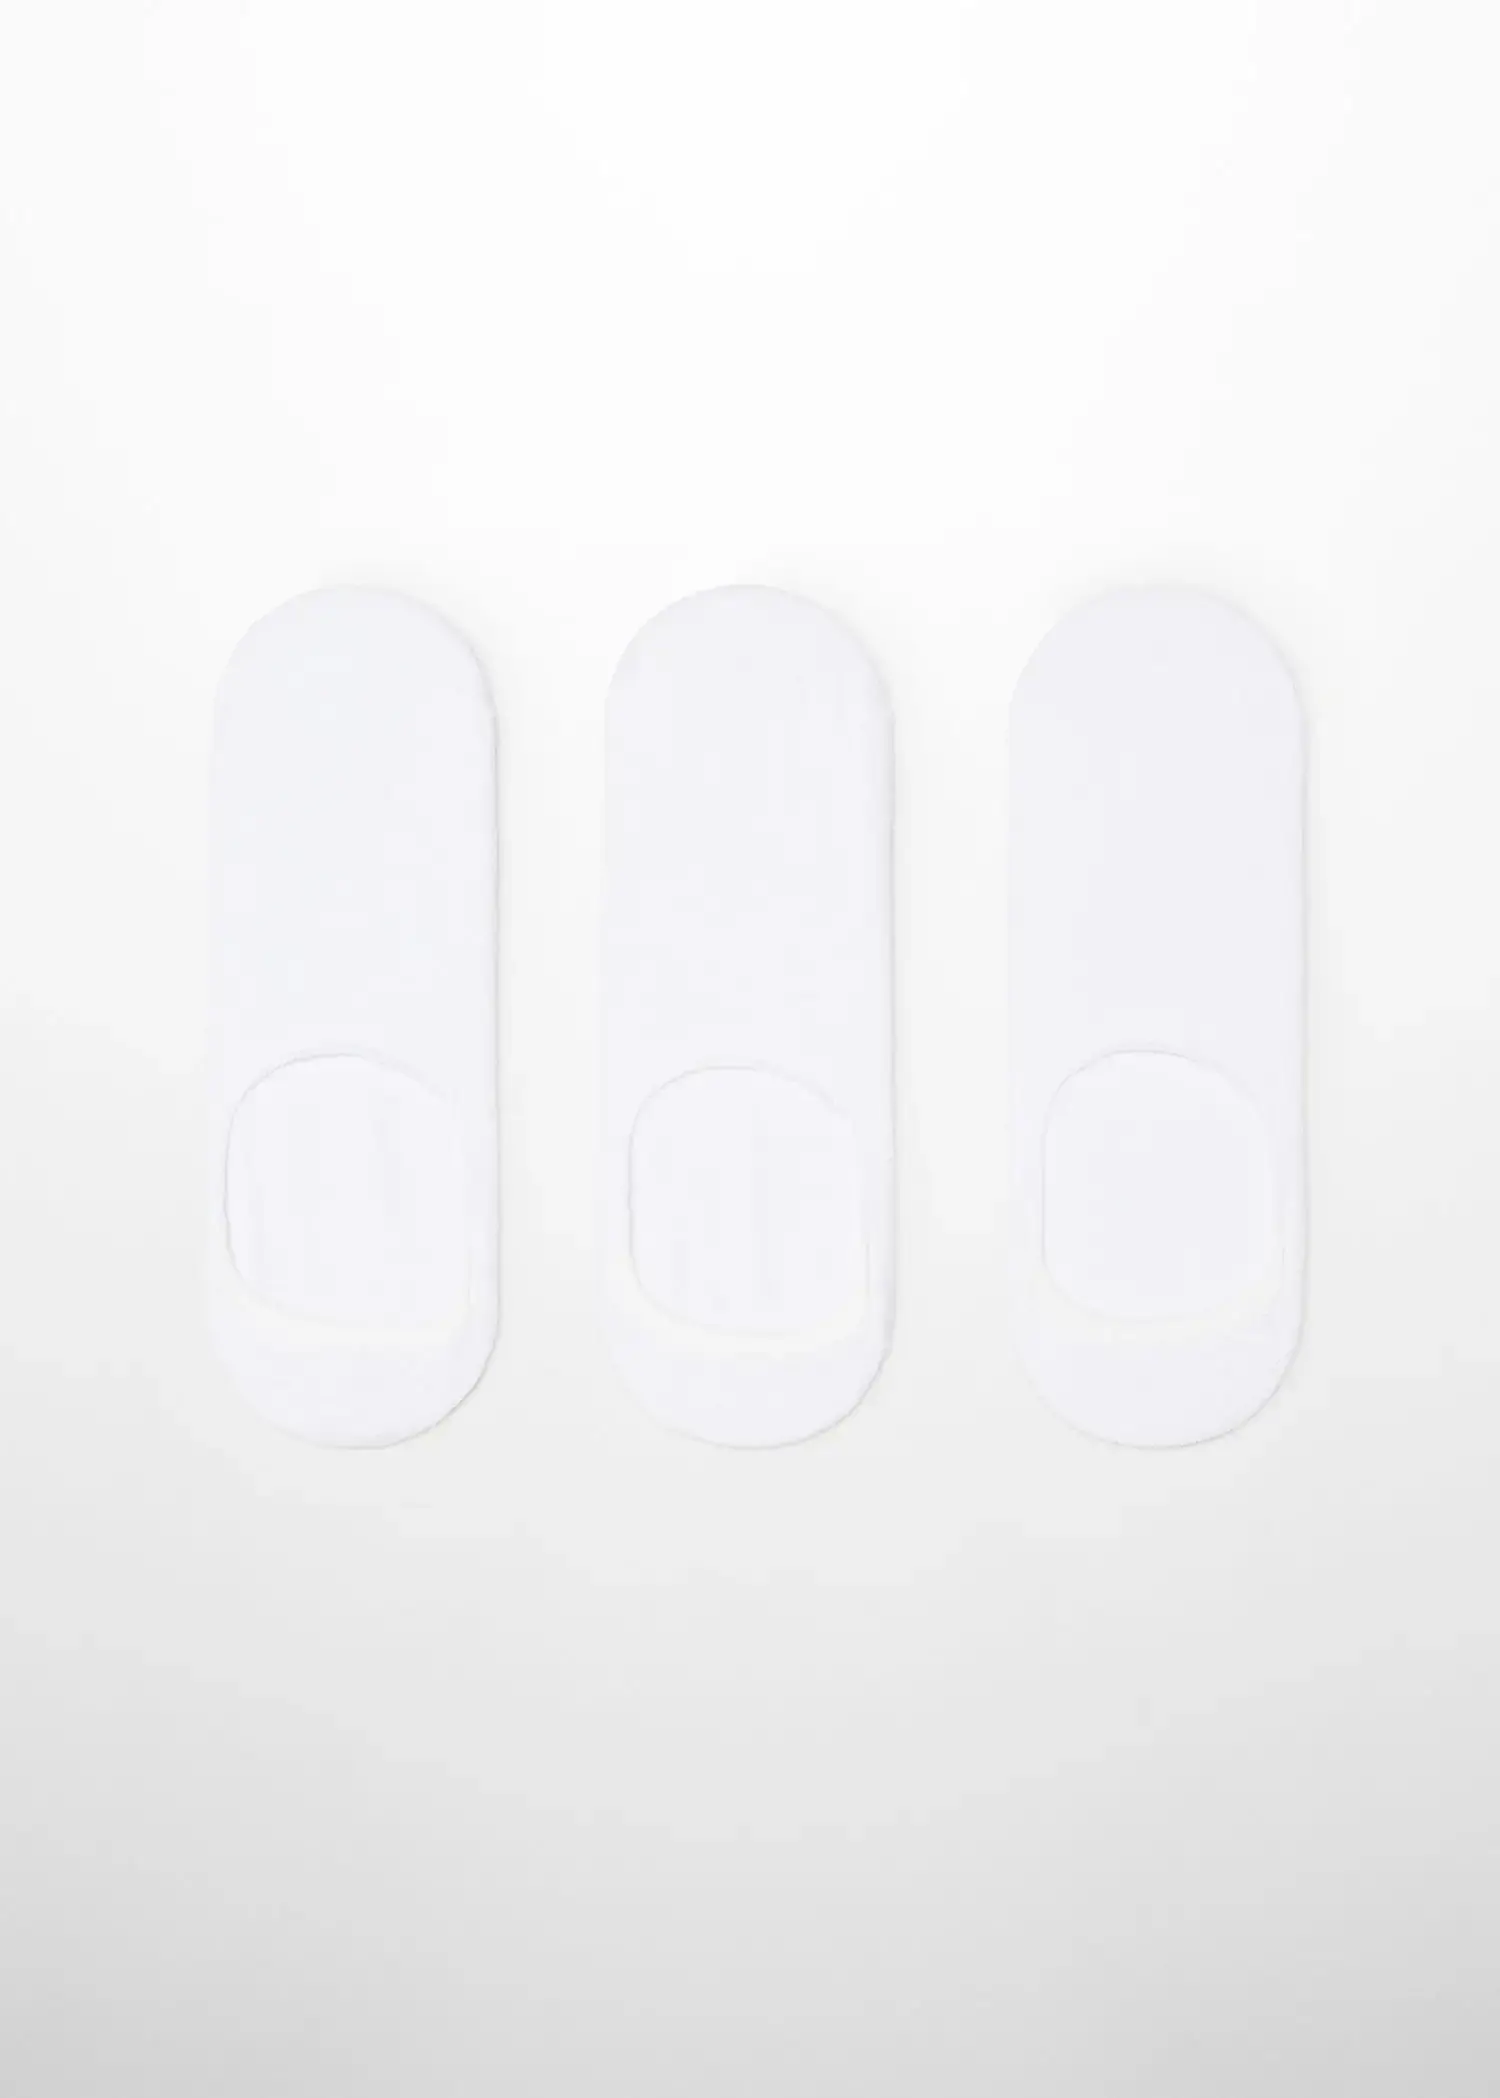 Mango 3-pack of invisible socks. 1